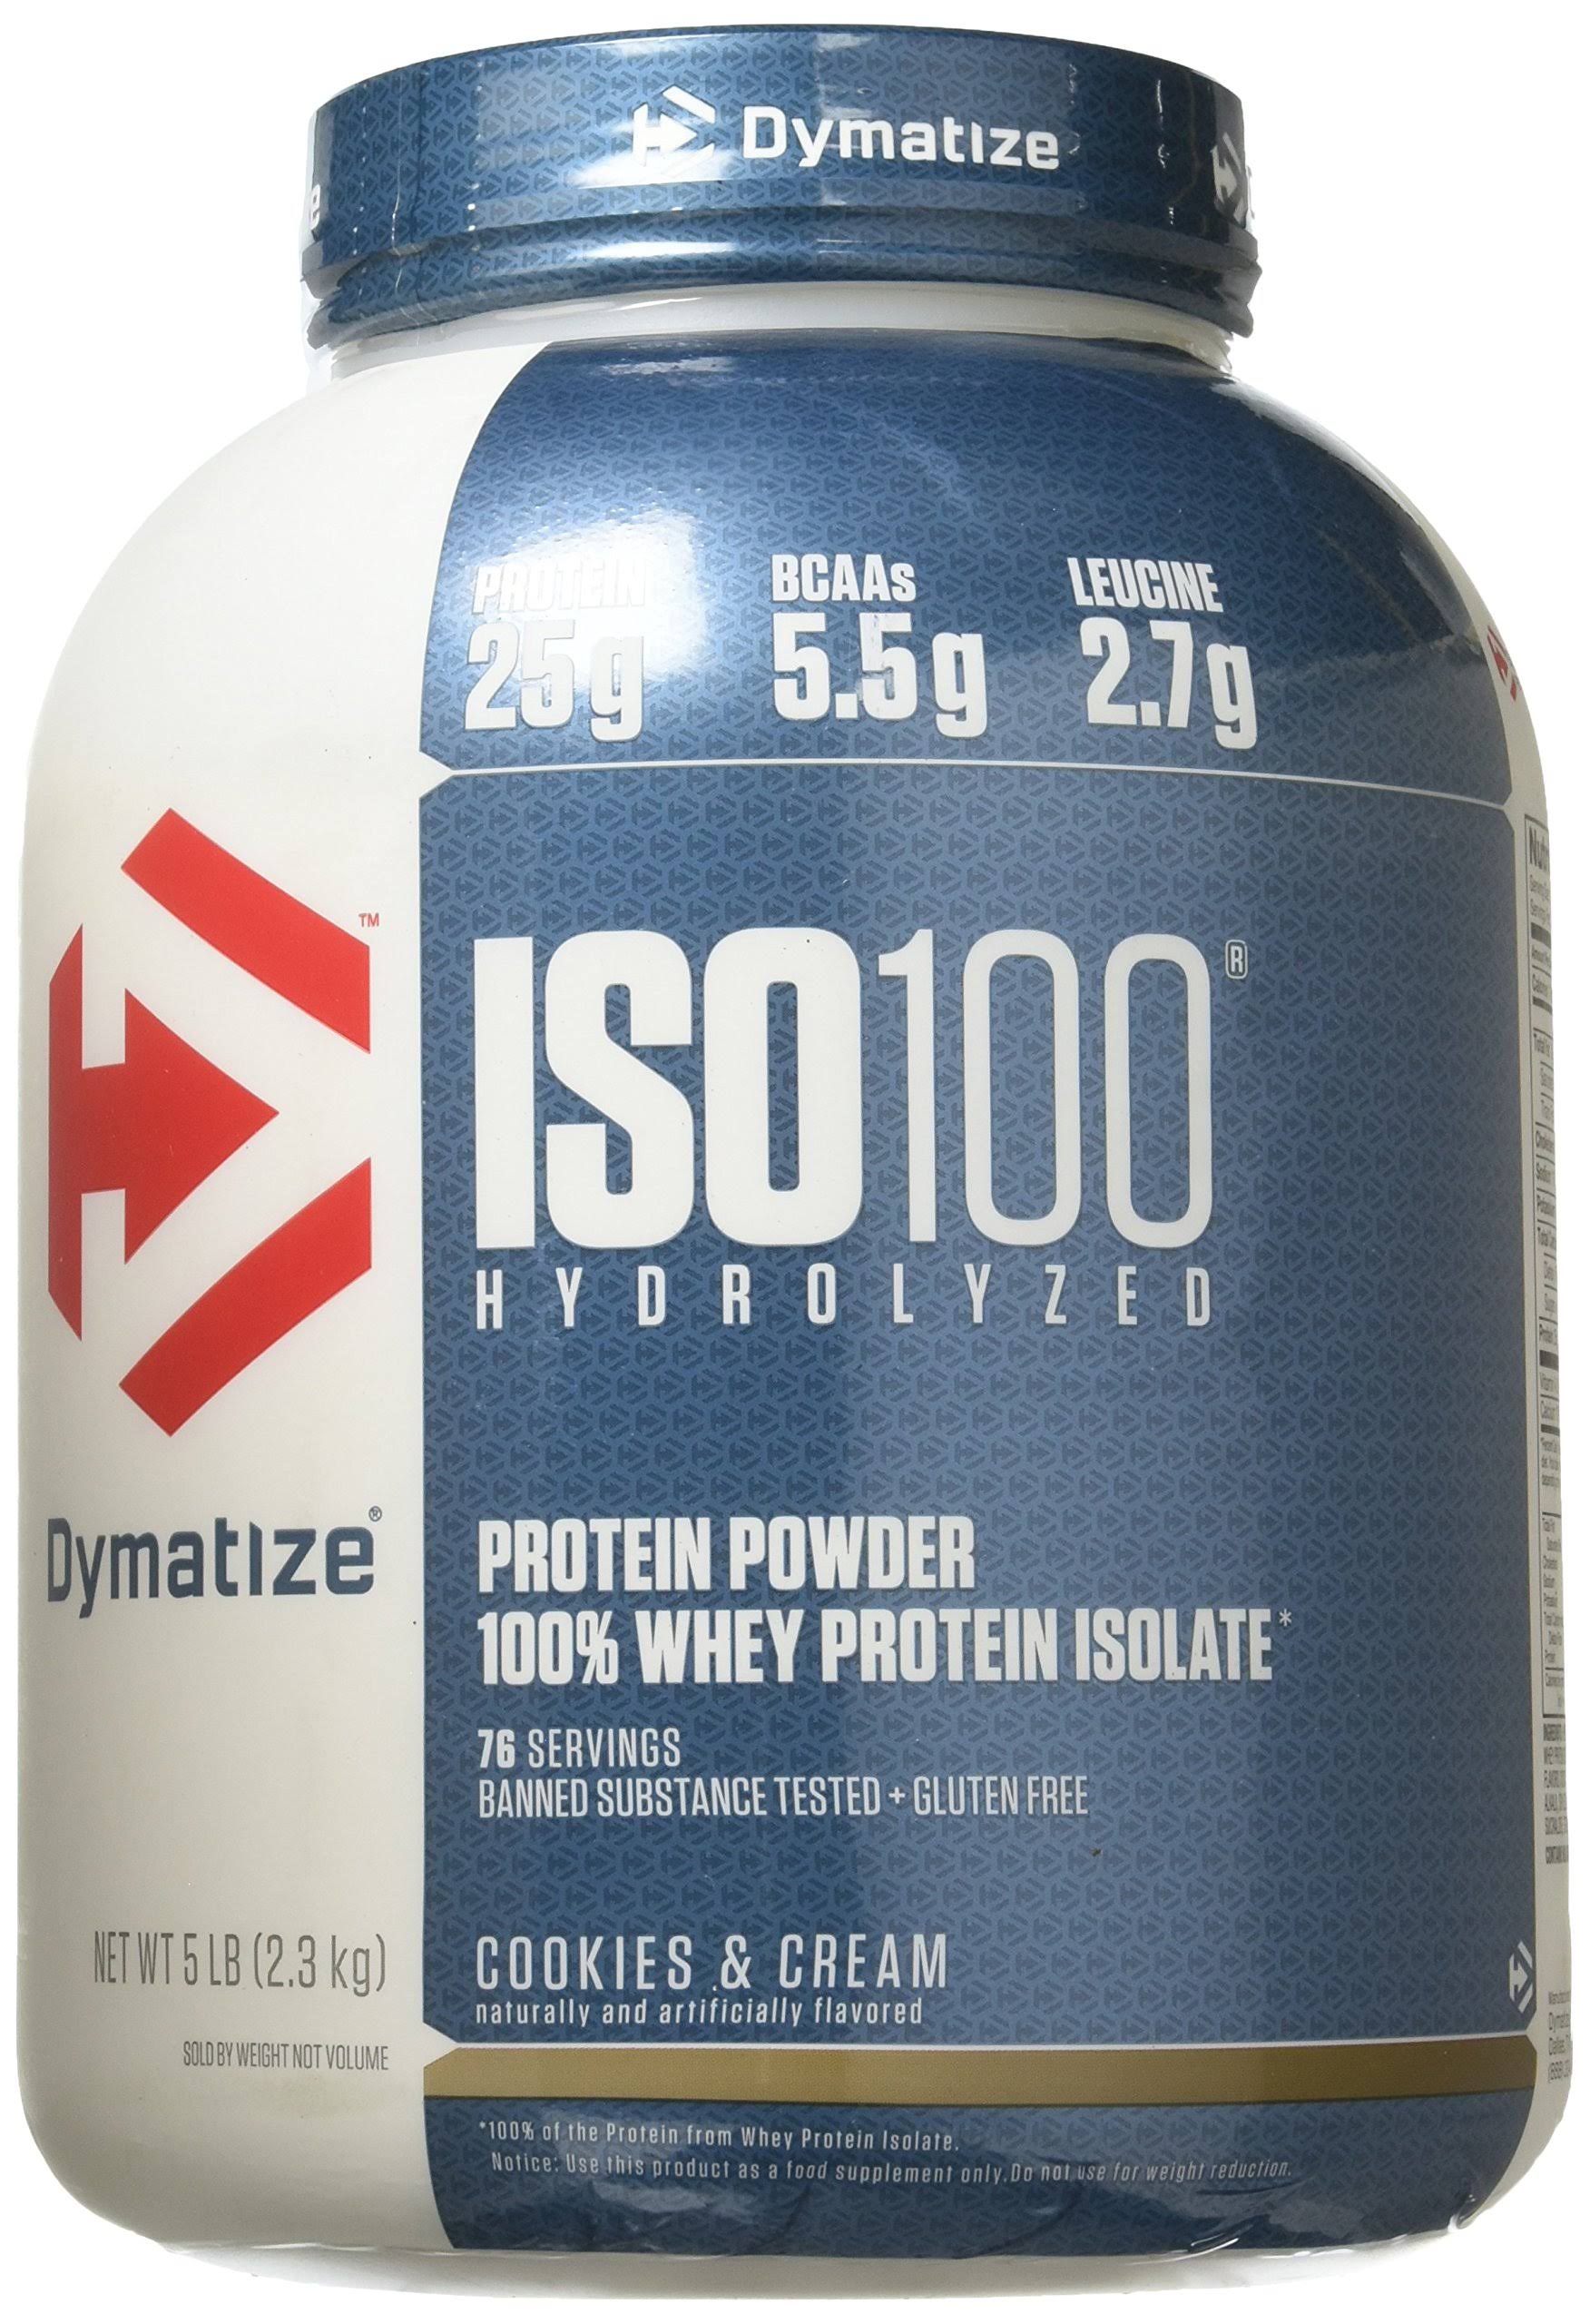 Dymatize ISO100 Hydrolyzed 100% Whey Protein Isolate - Cookies & Cream, 5 lbs